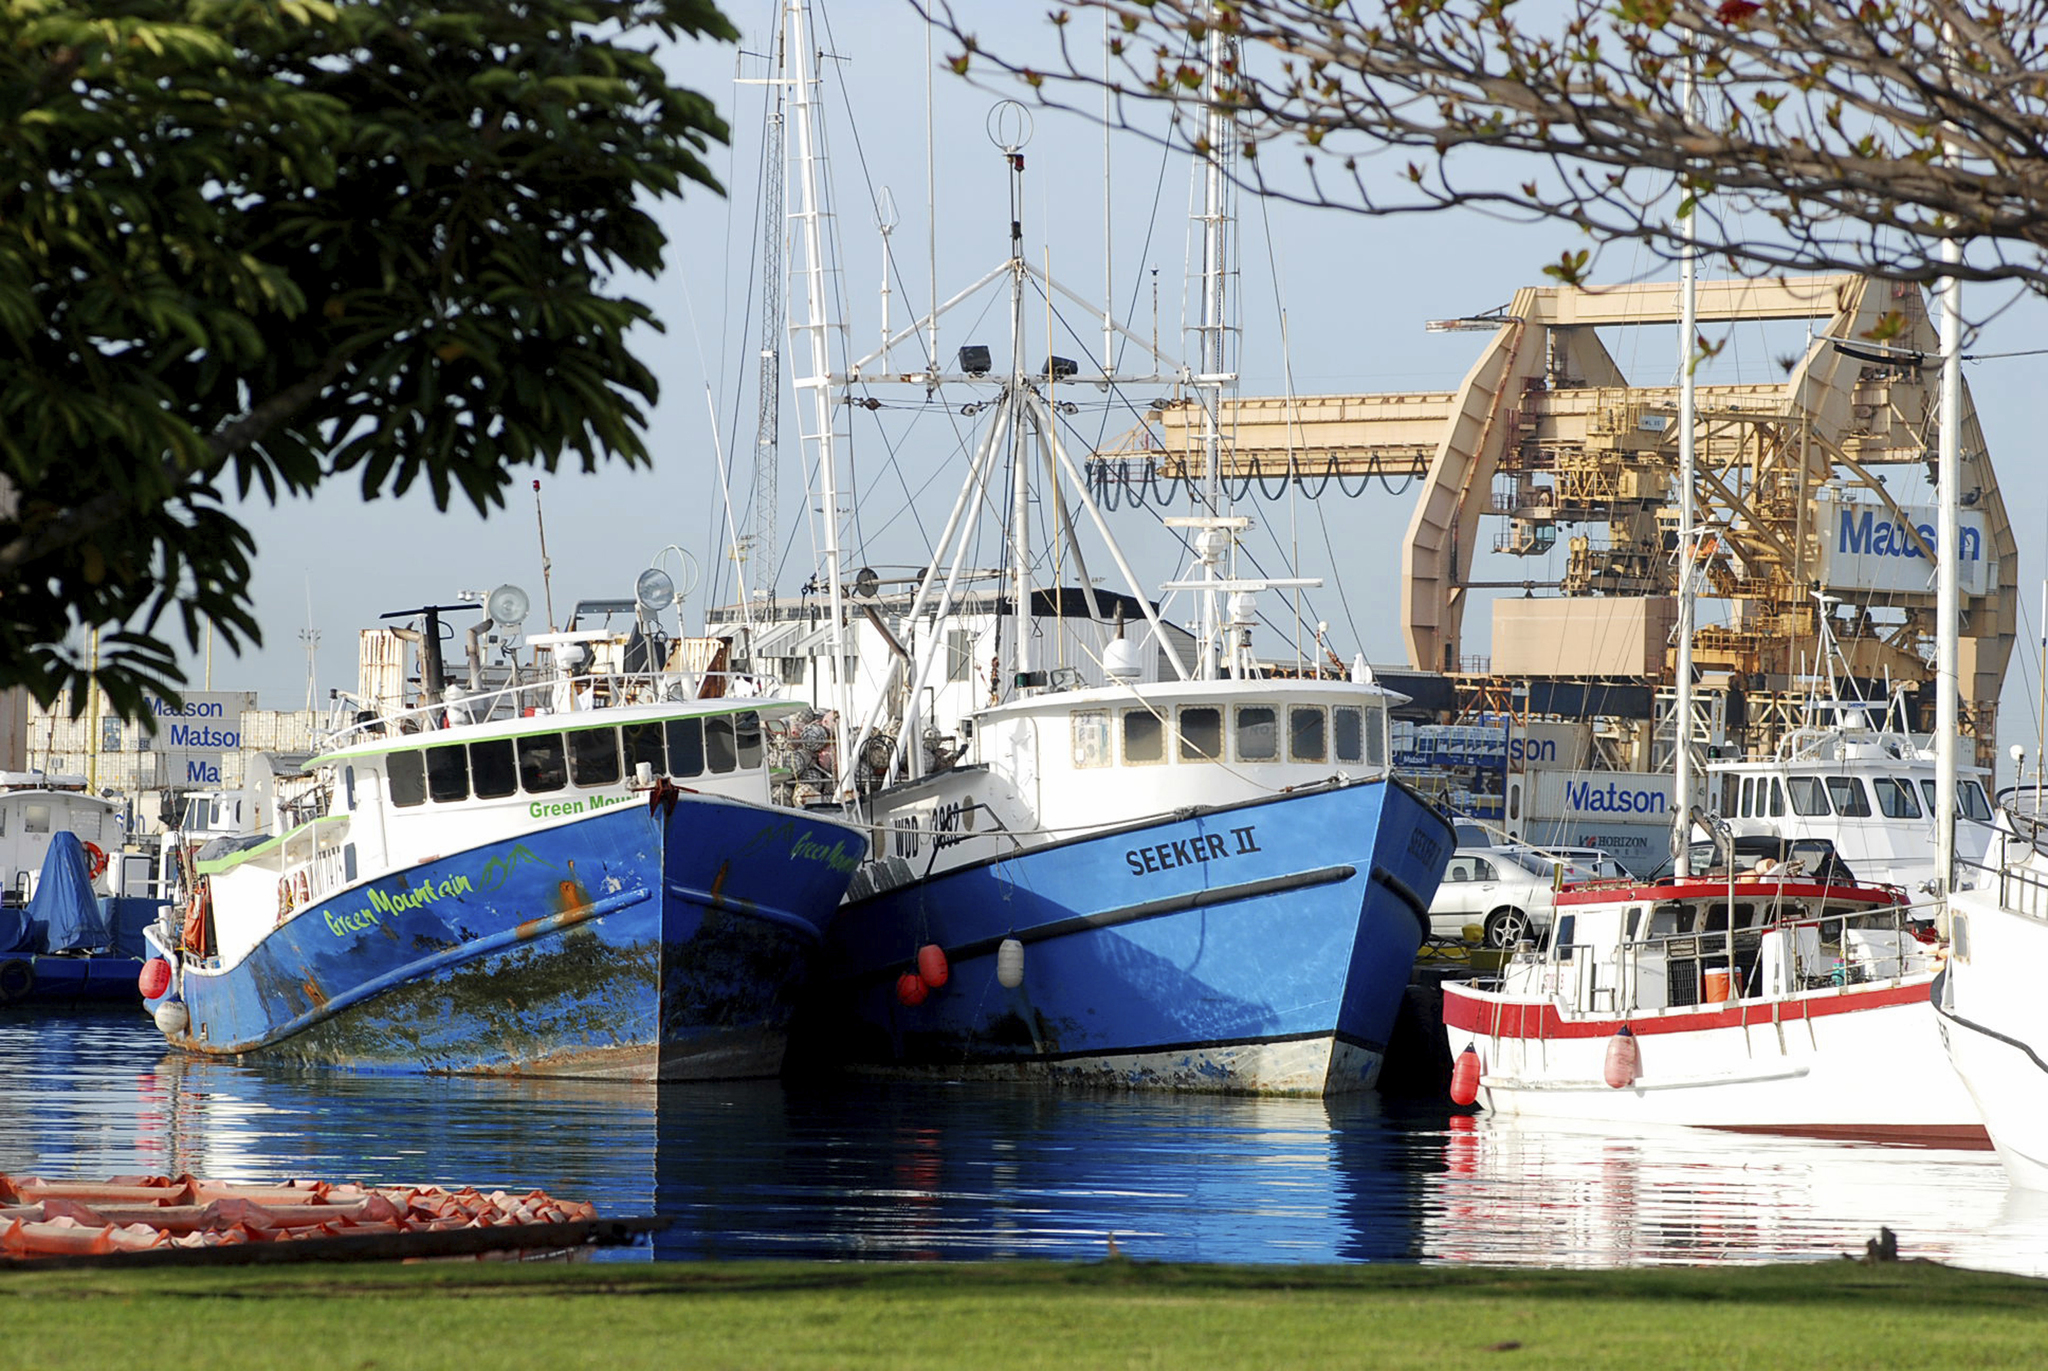 This Feb. 2 photo shows commercial fishing boats docked at Pier 38 in Honolulu. (Caleb Jones | The Associated Press)